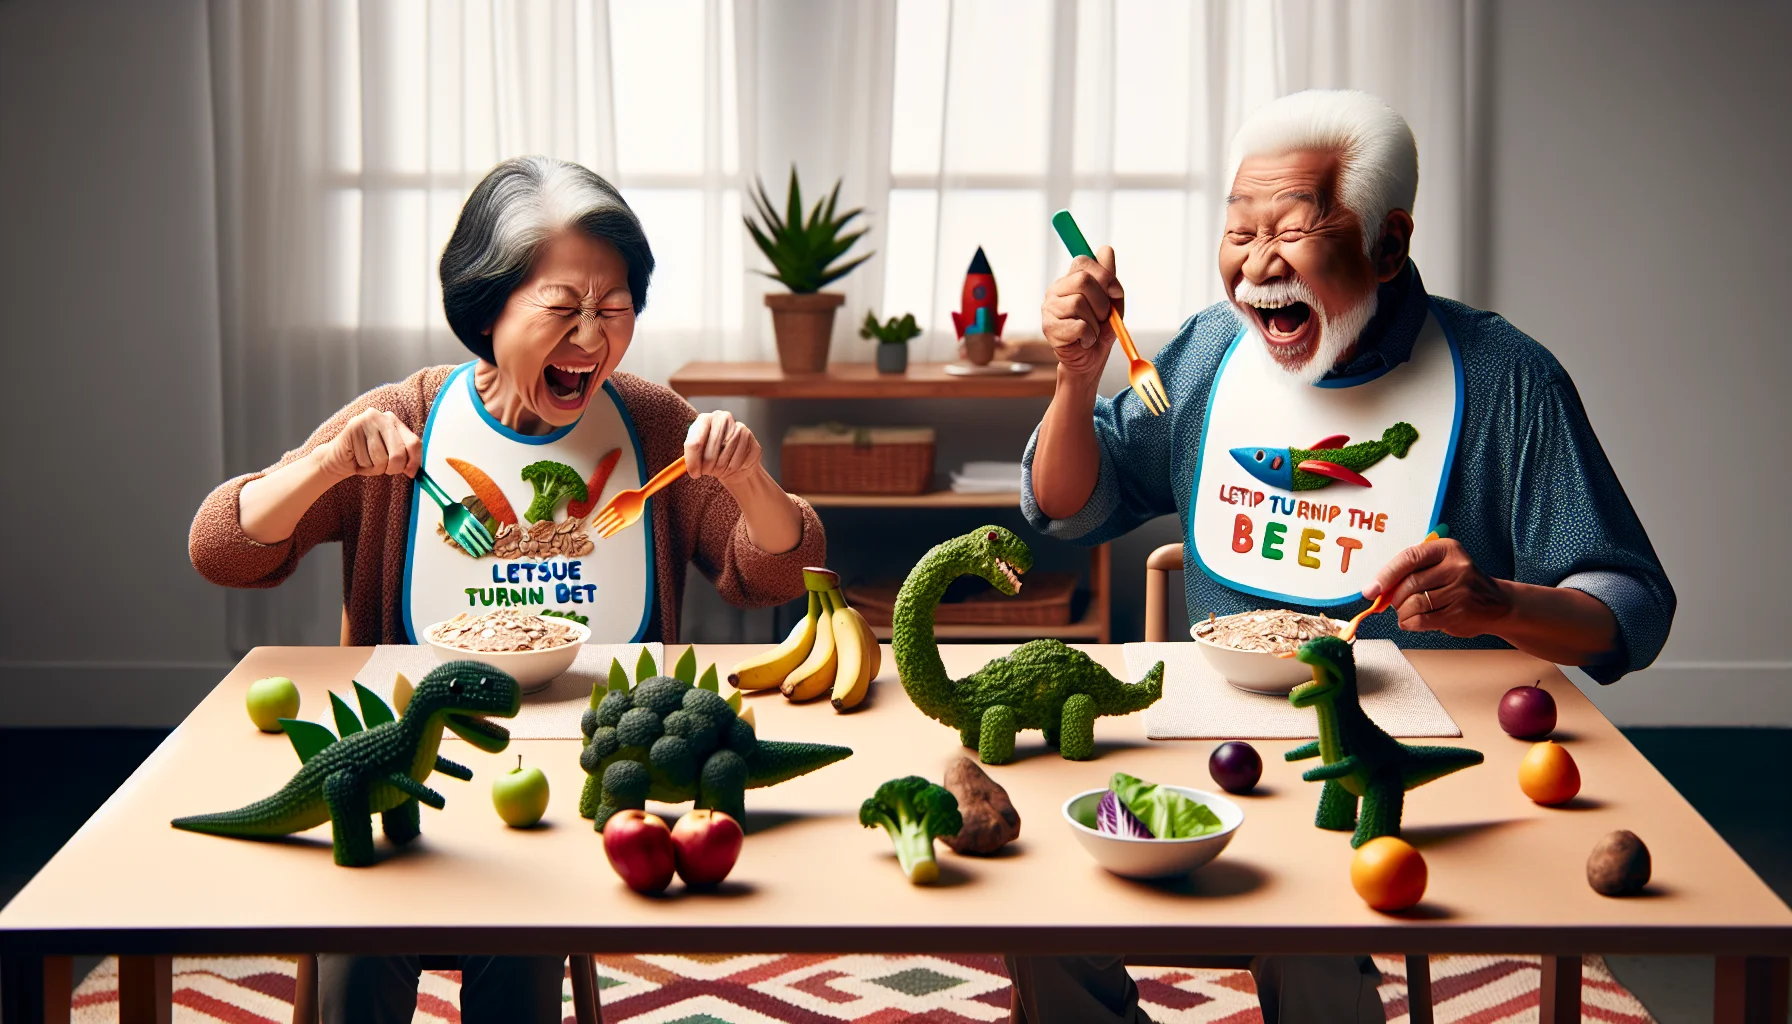 Create a humorous scene in a realistic setting at a dining table. It displays a variety of high fiber foods like oatmeal, bananas, and broccoli, artfully arranged in shapes of dinosaurs and rockets to appeal to a toddler's imaginative spirit. Two elderly figures, a South Asian woman and a Hispanic man are jovially attempting to eat these foods with oversized toddler utensils. They are wearing bibs with healthy food puns, such as 'Lettuce Turnip the Beet'. Their faces are filled with laughter and there's a playful atmosphere, highlighting the importance of healthy eating at any age.